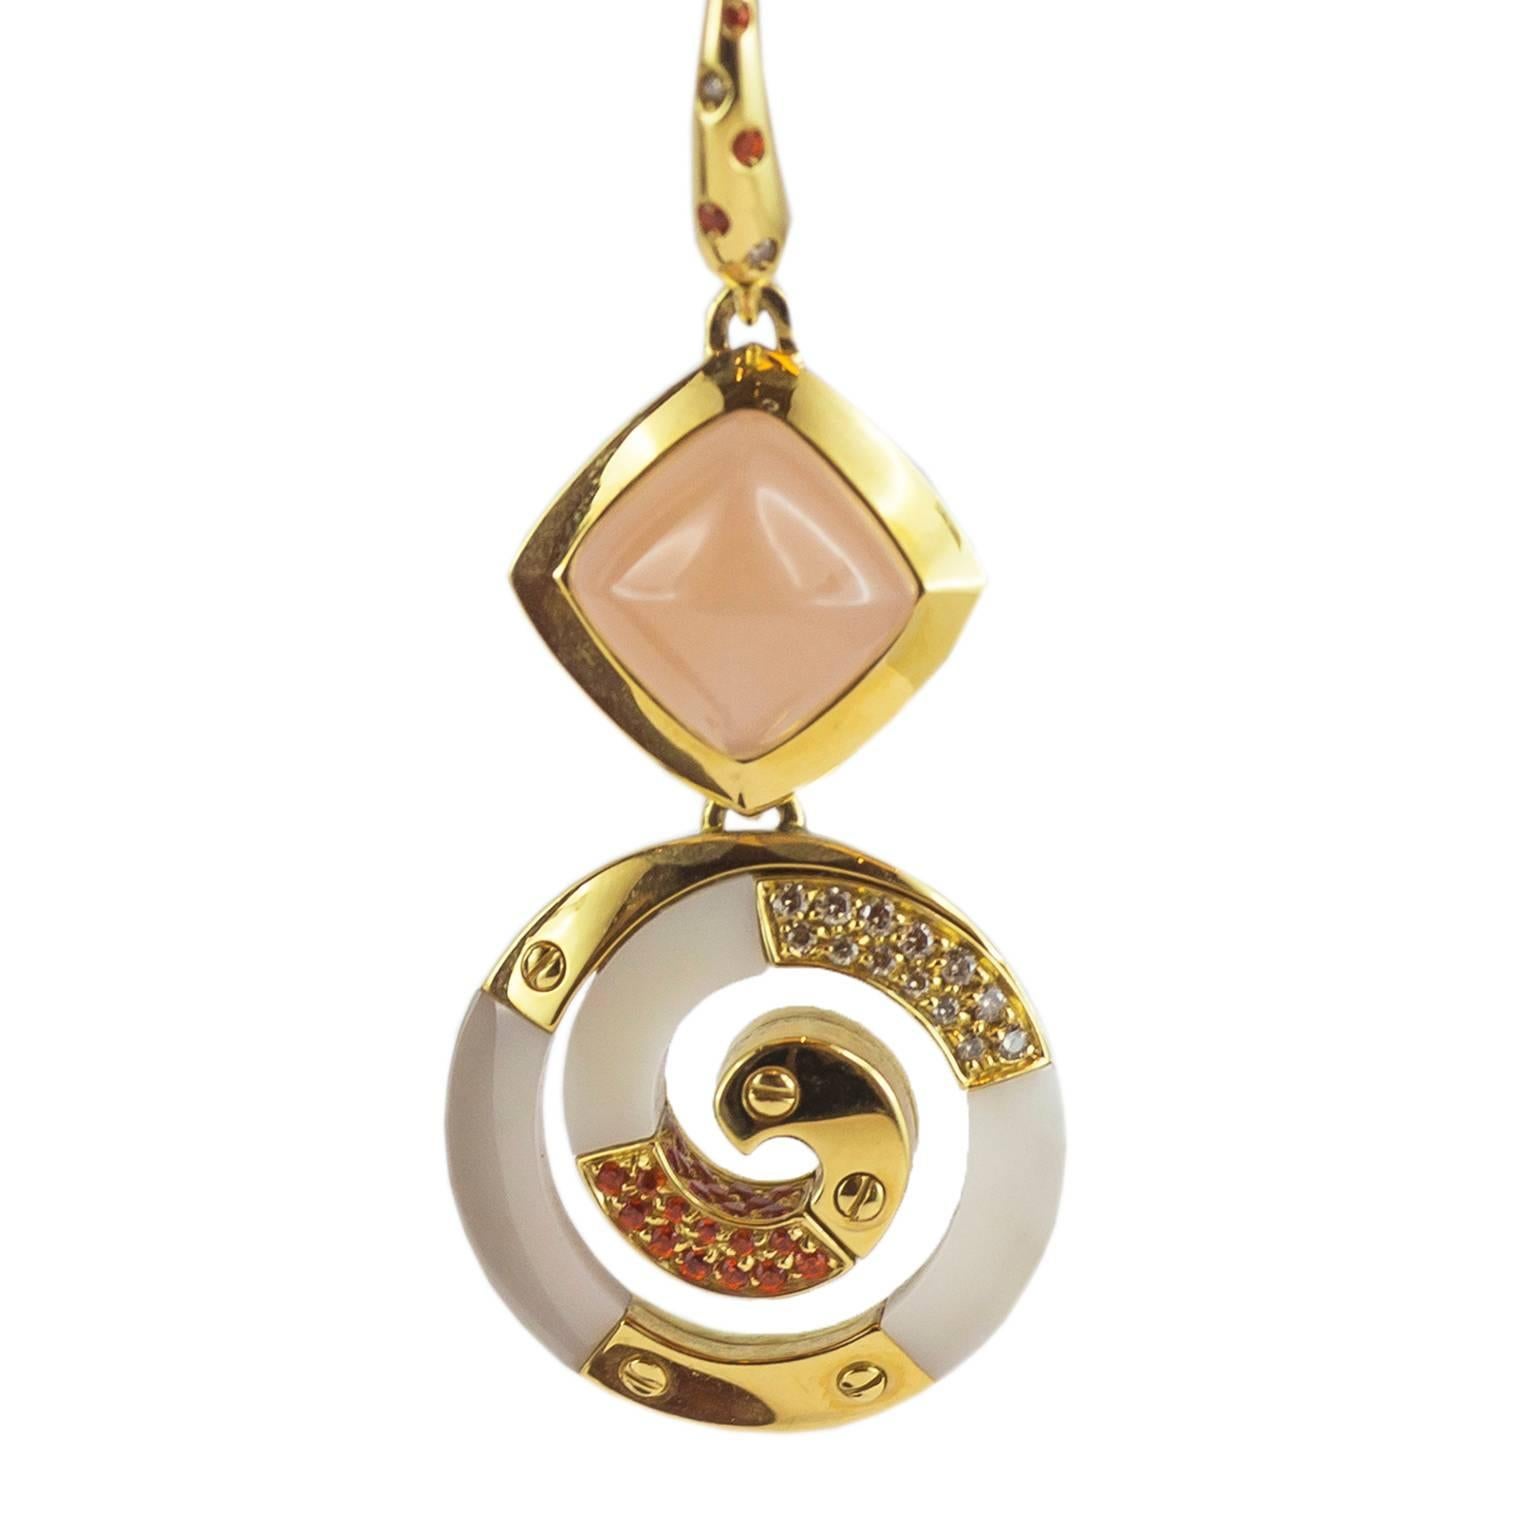 18 Karat yellow gold earrings in nouveau style with soft colors. Along the pendant we find a very beautiful pink quartz stone followed by a spiral of bright white kogolong, semiprecious stones and 18 Karat yellow gold.